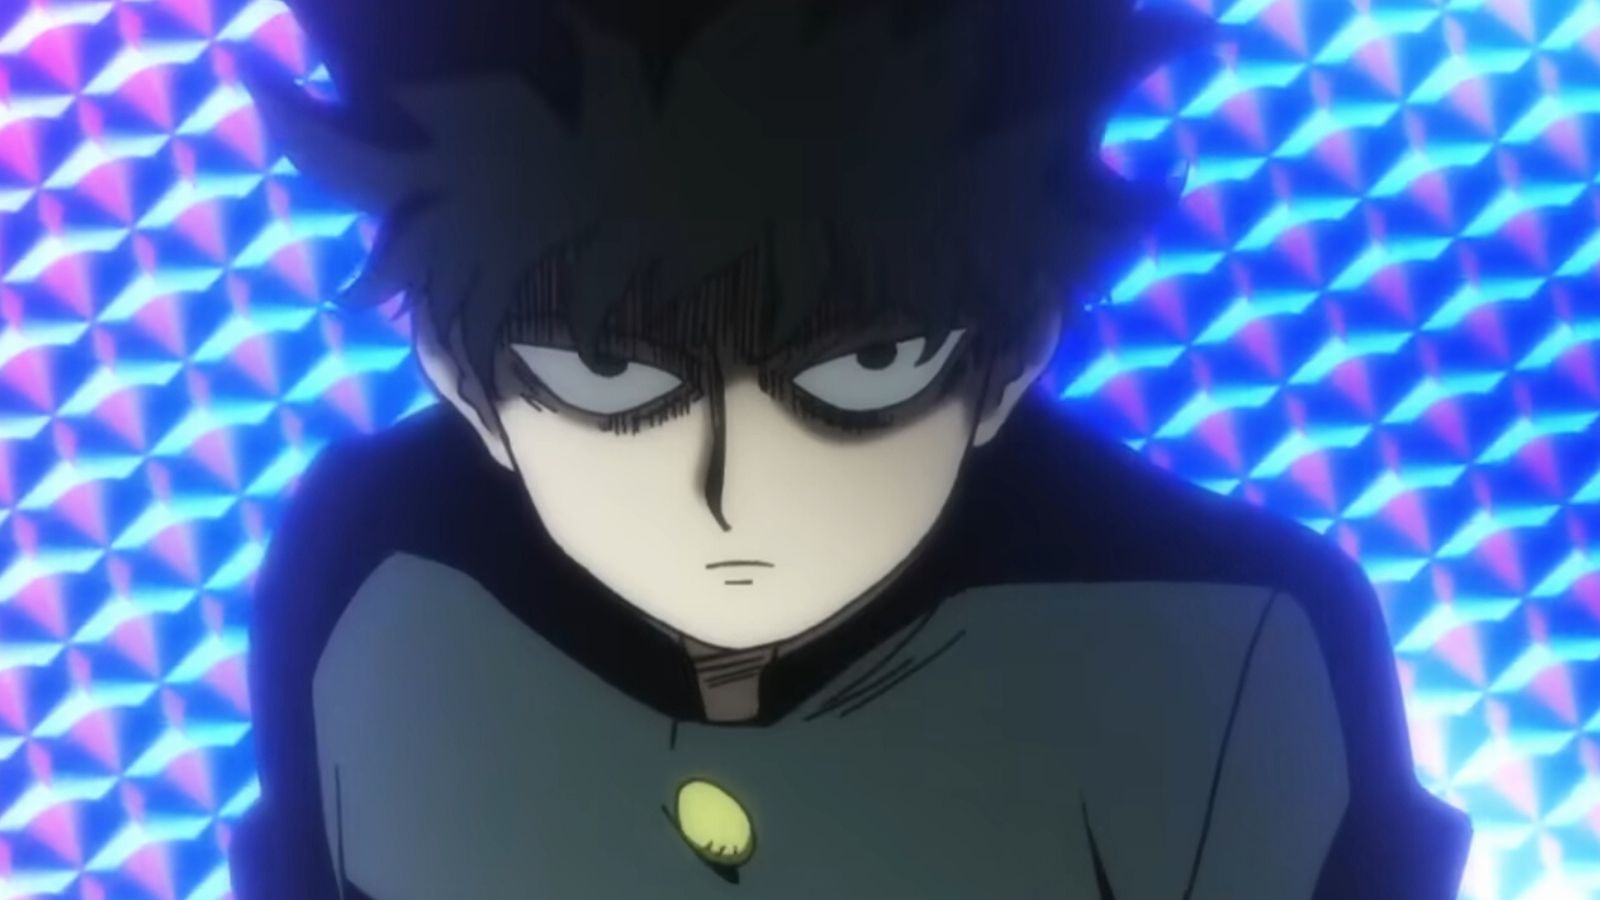 Season 3 of Mob Psycho 100 will be the final season of the series